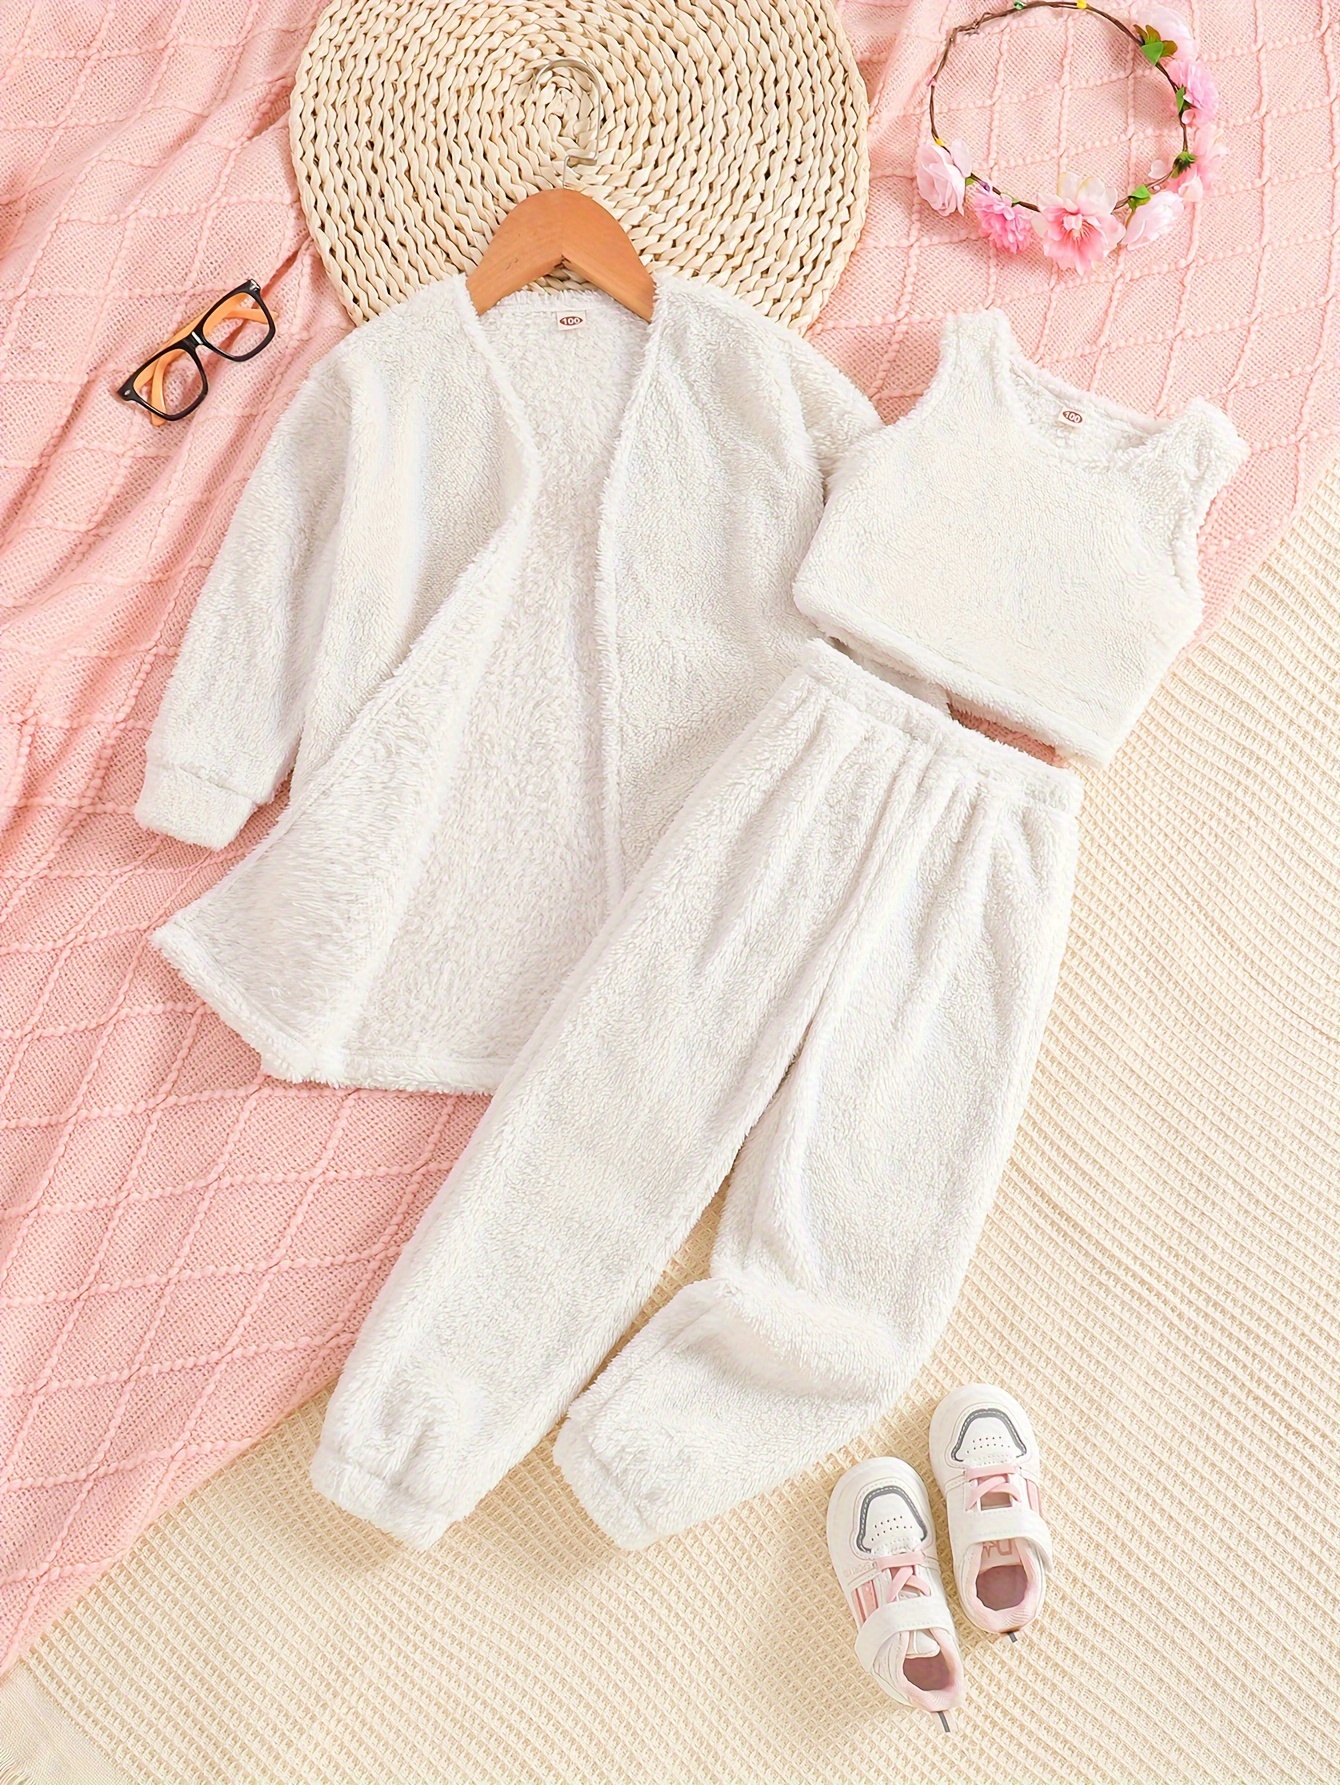 Peach Capris Outfit, Girls Fall Outfit, Fall Set, Summer Outfit